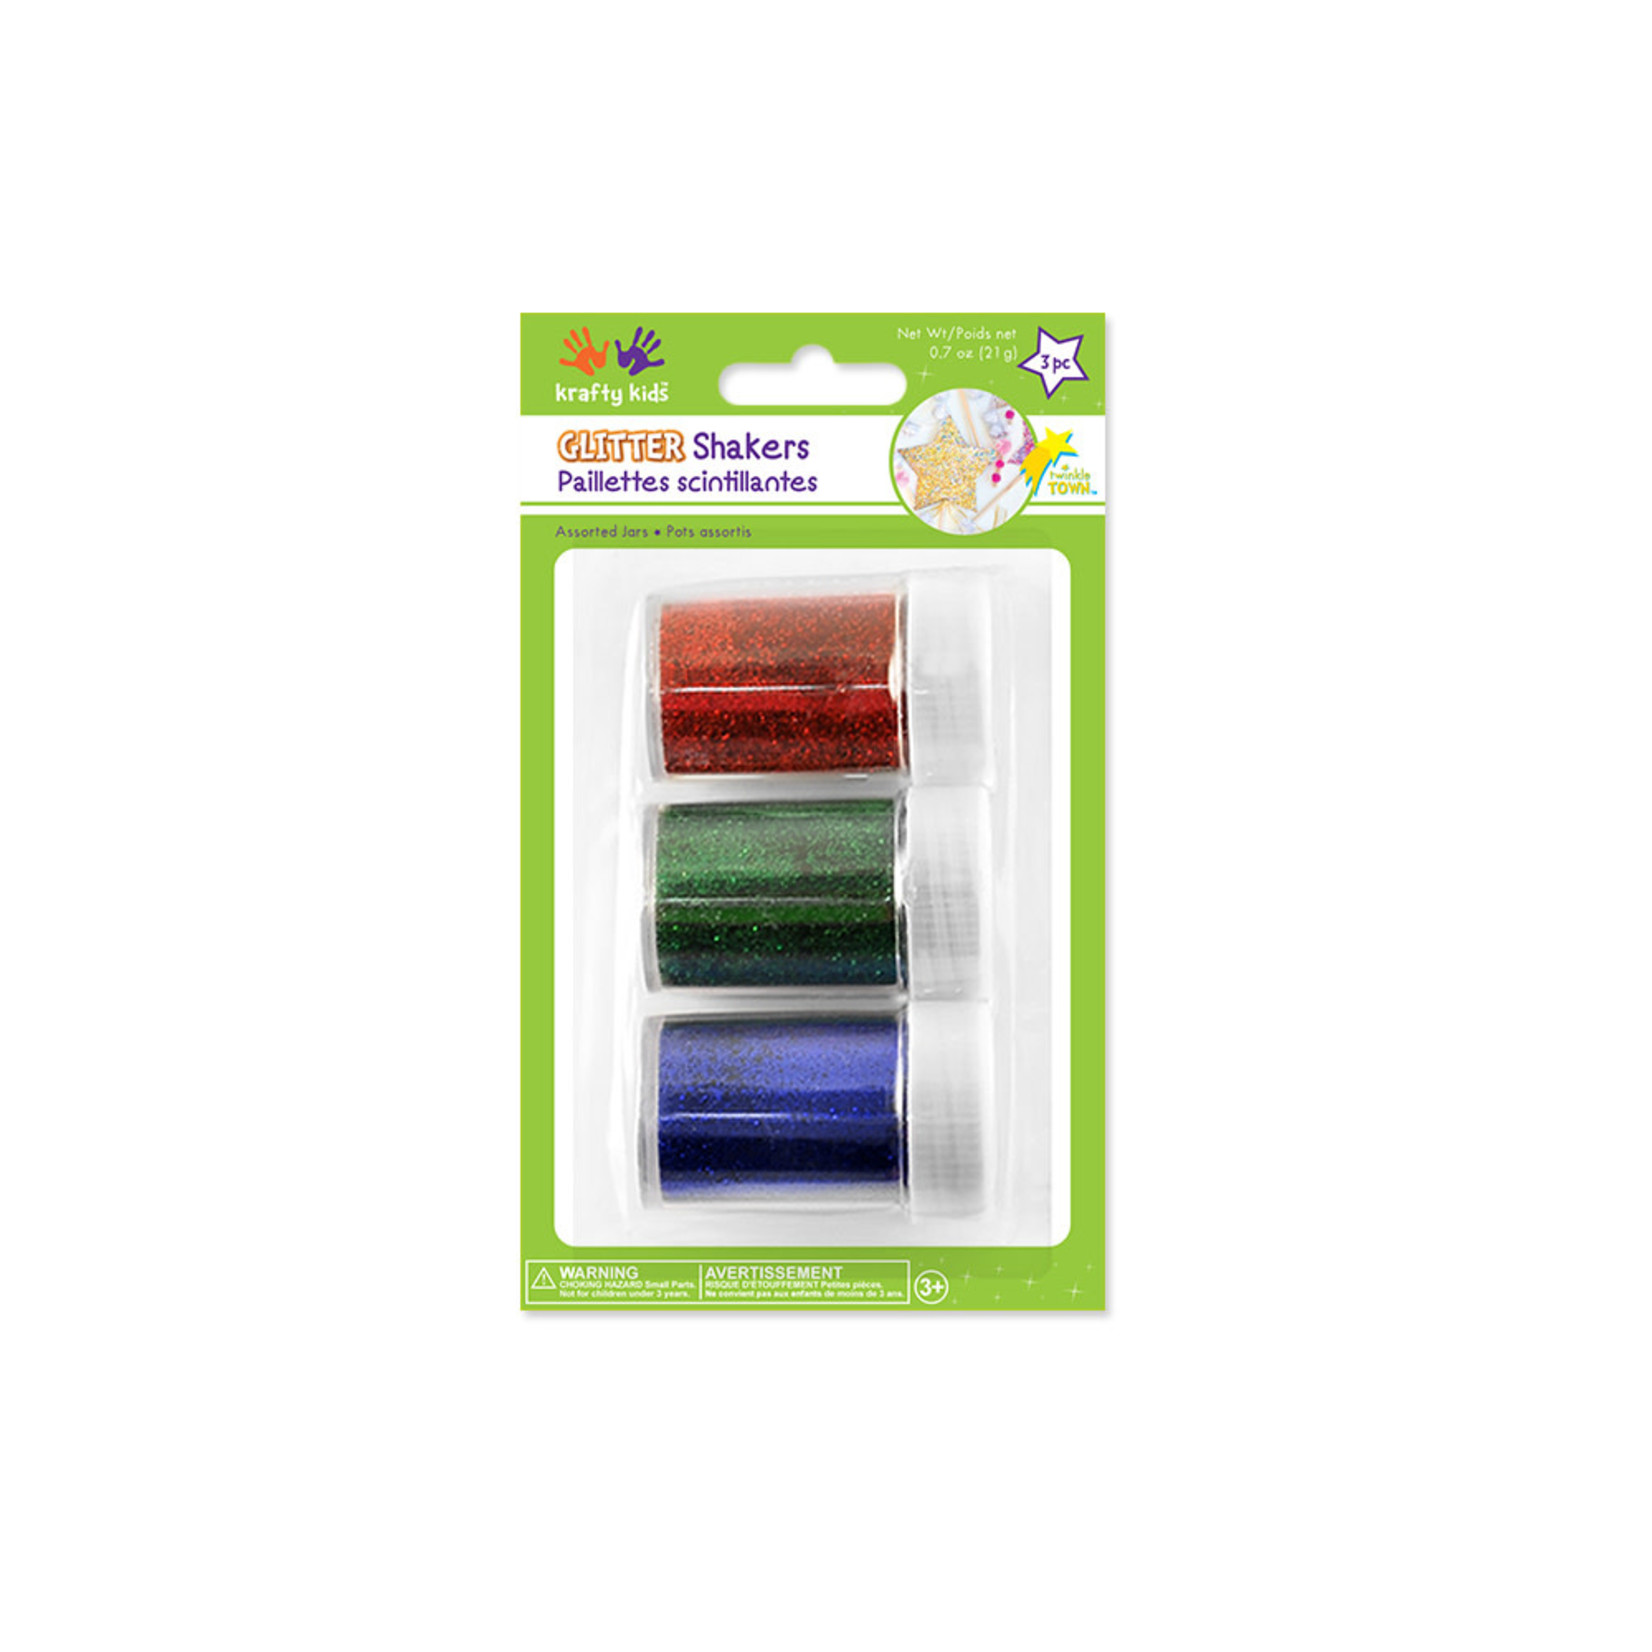 TWINKLE TOWN: 21G GLITTER SHAKER JARS 3X7G WITH SCREW-TOP B) RED/GREEN/BLUE